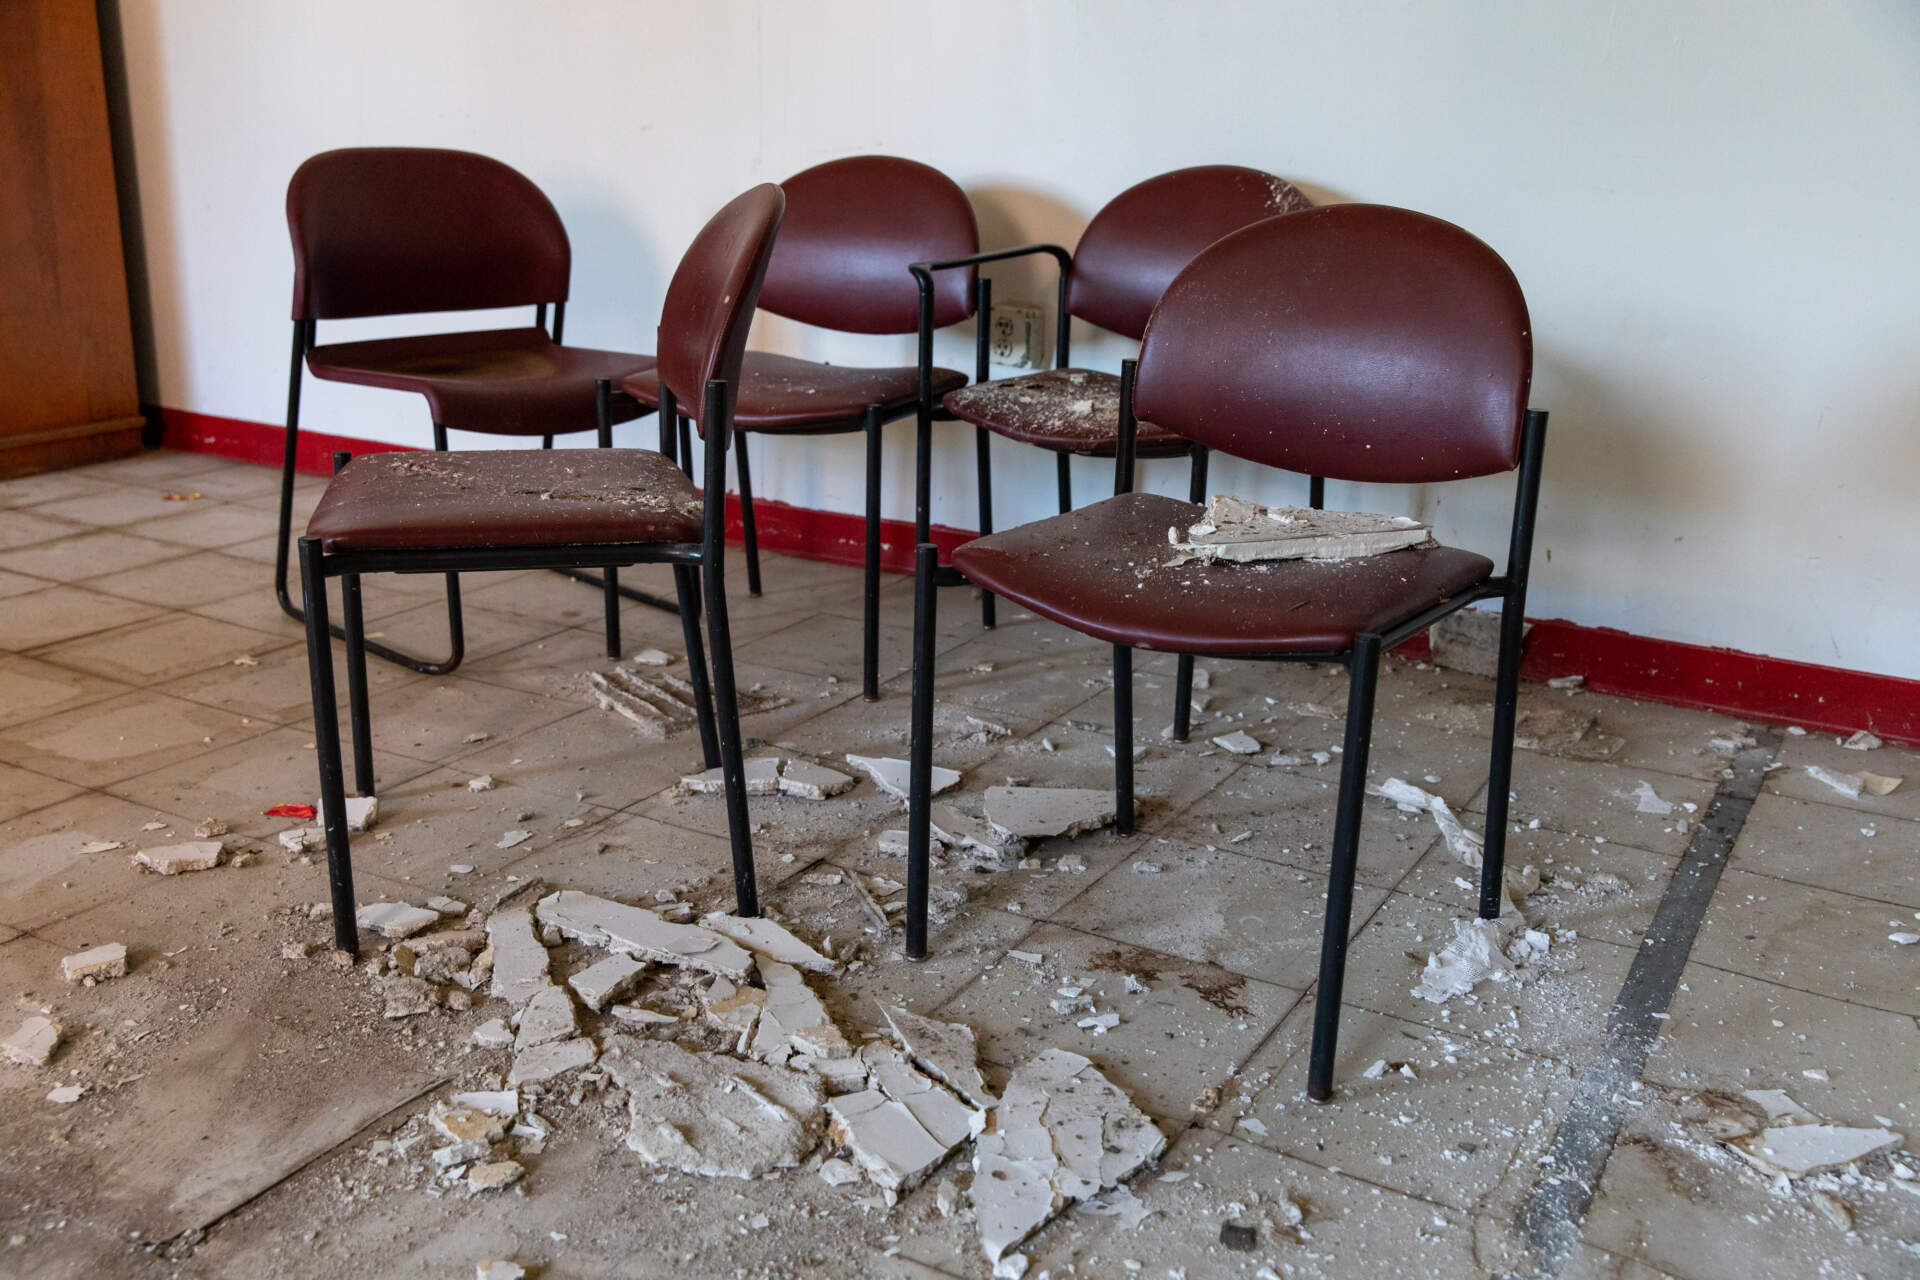 Chairs covered in dust and ceiling debris inside one of the buildings. (Mayor’s Office Photo by Mike Mejia)